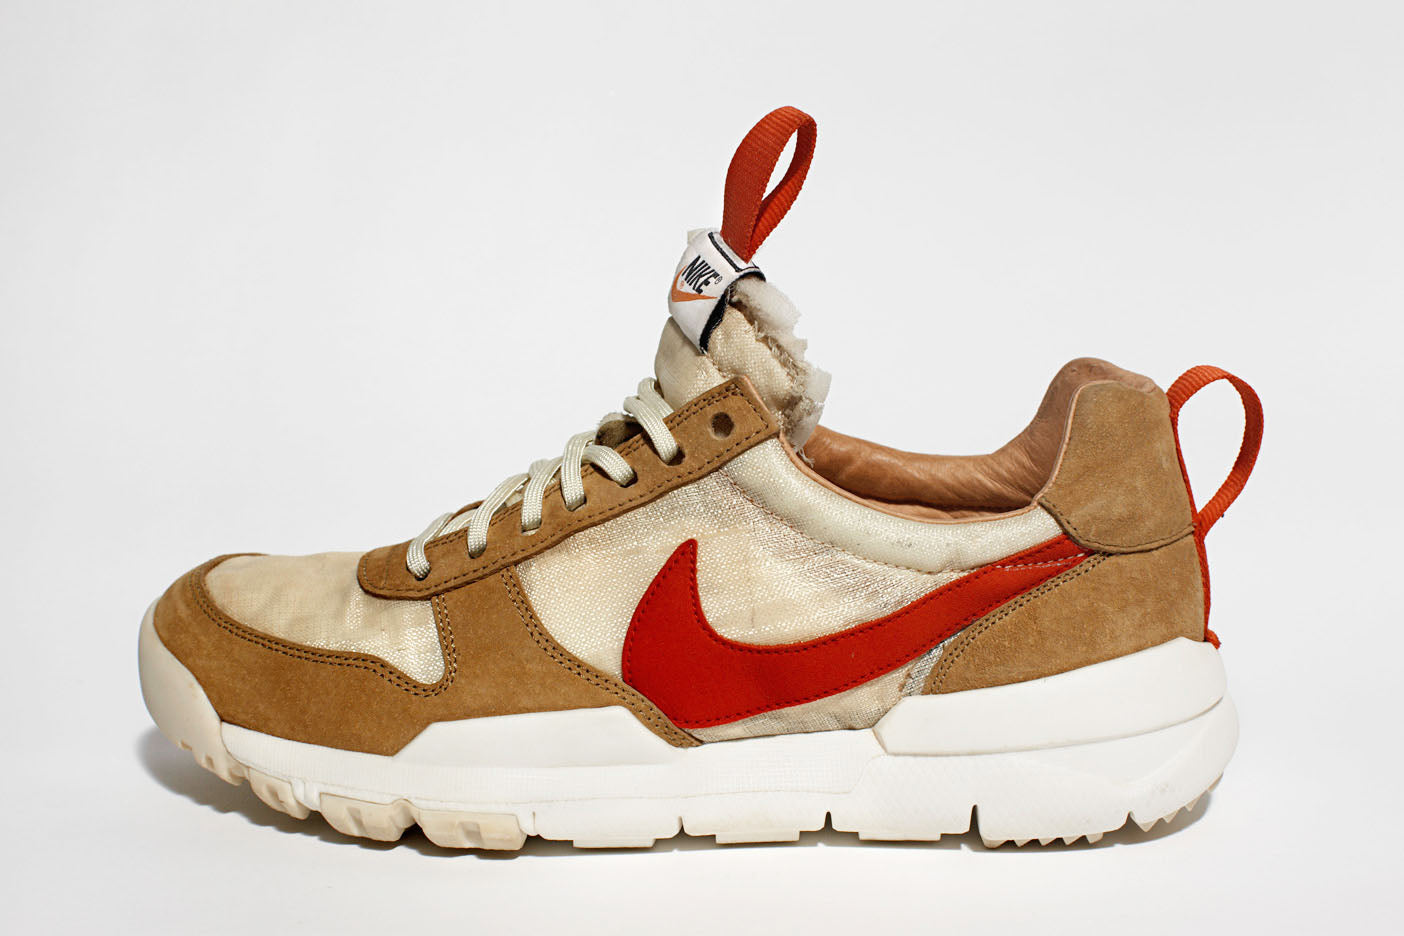 Buy Mars Yard Shoes: New Releases & Iconic Styles